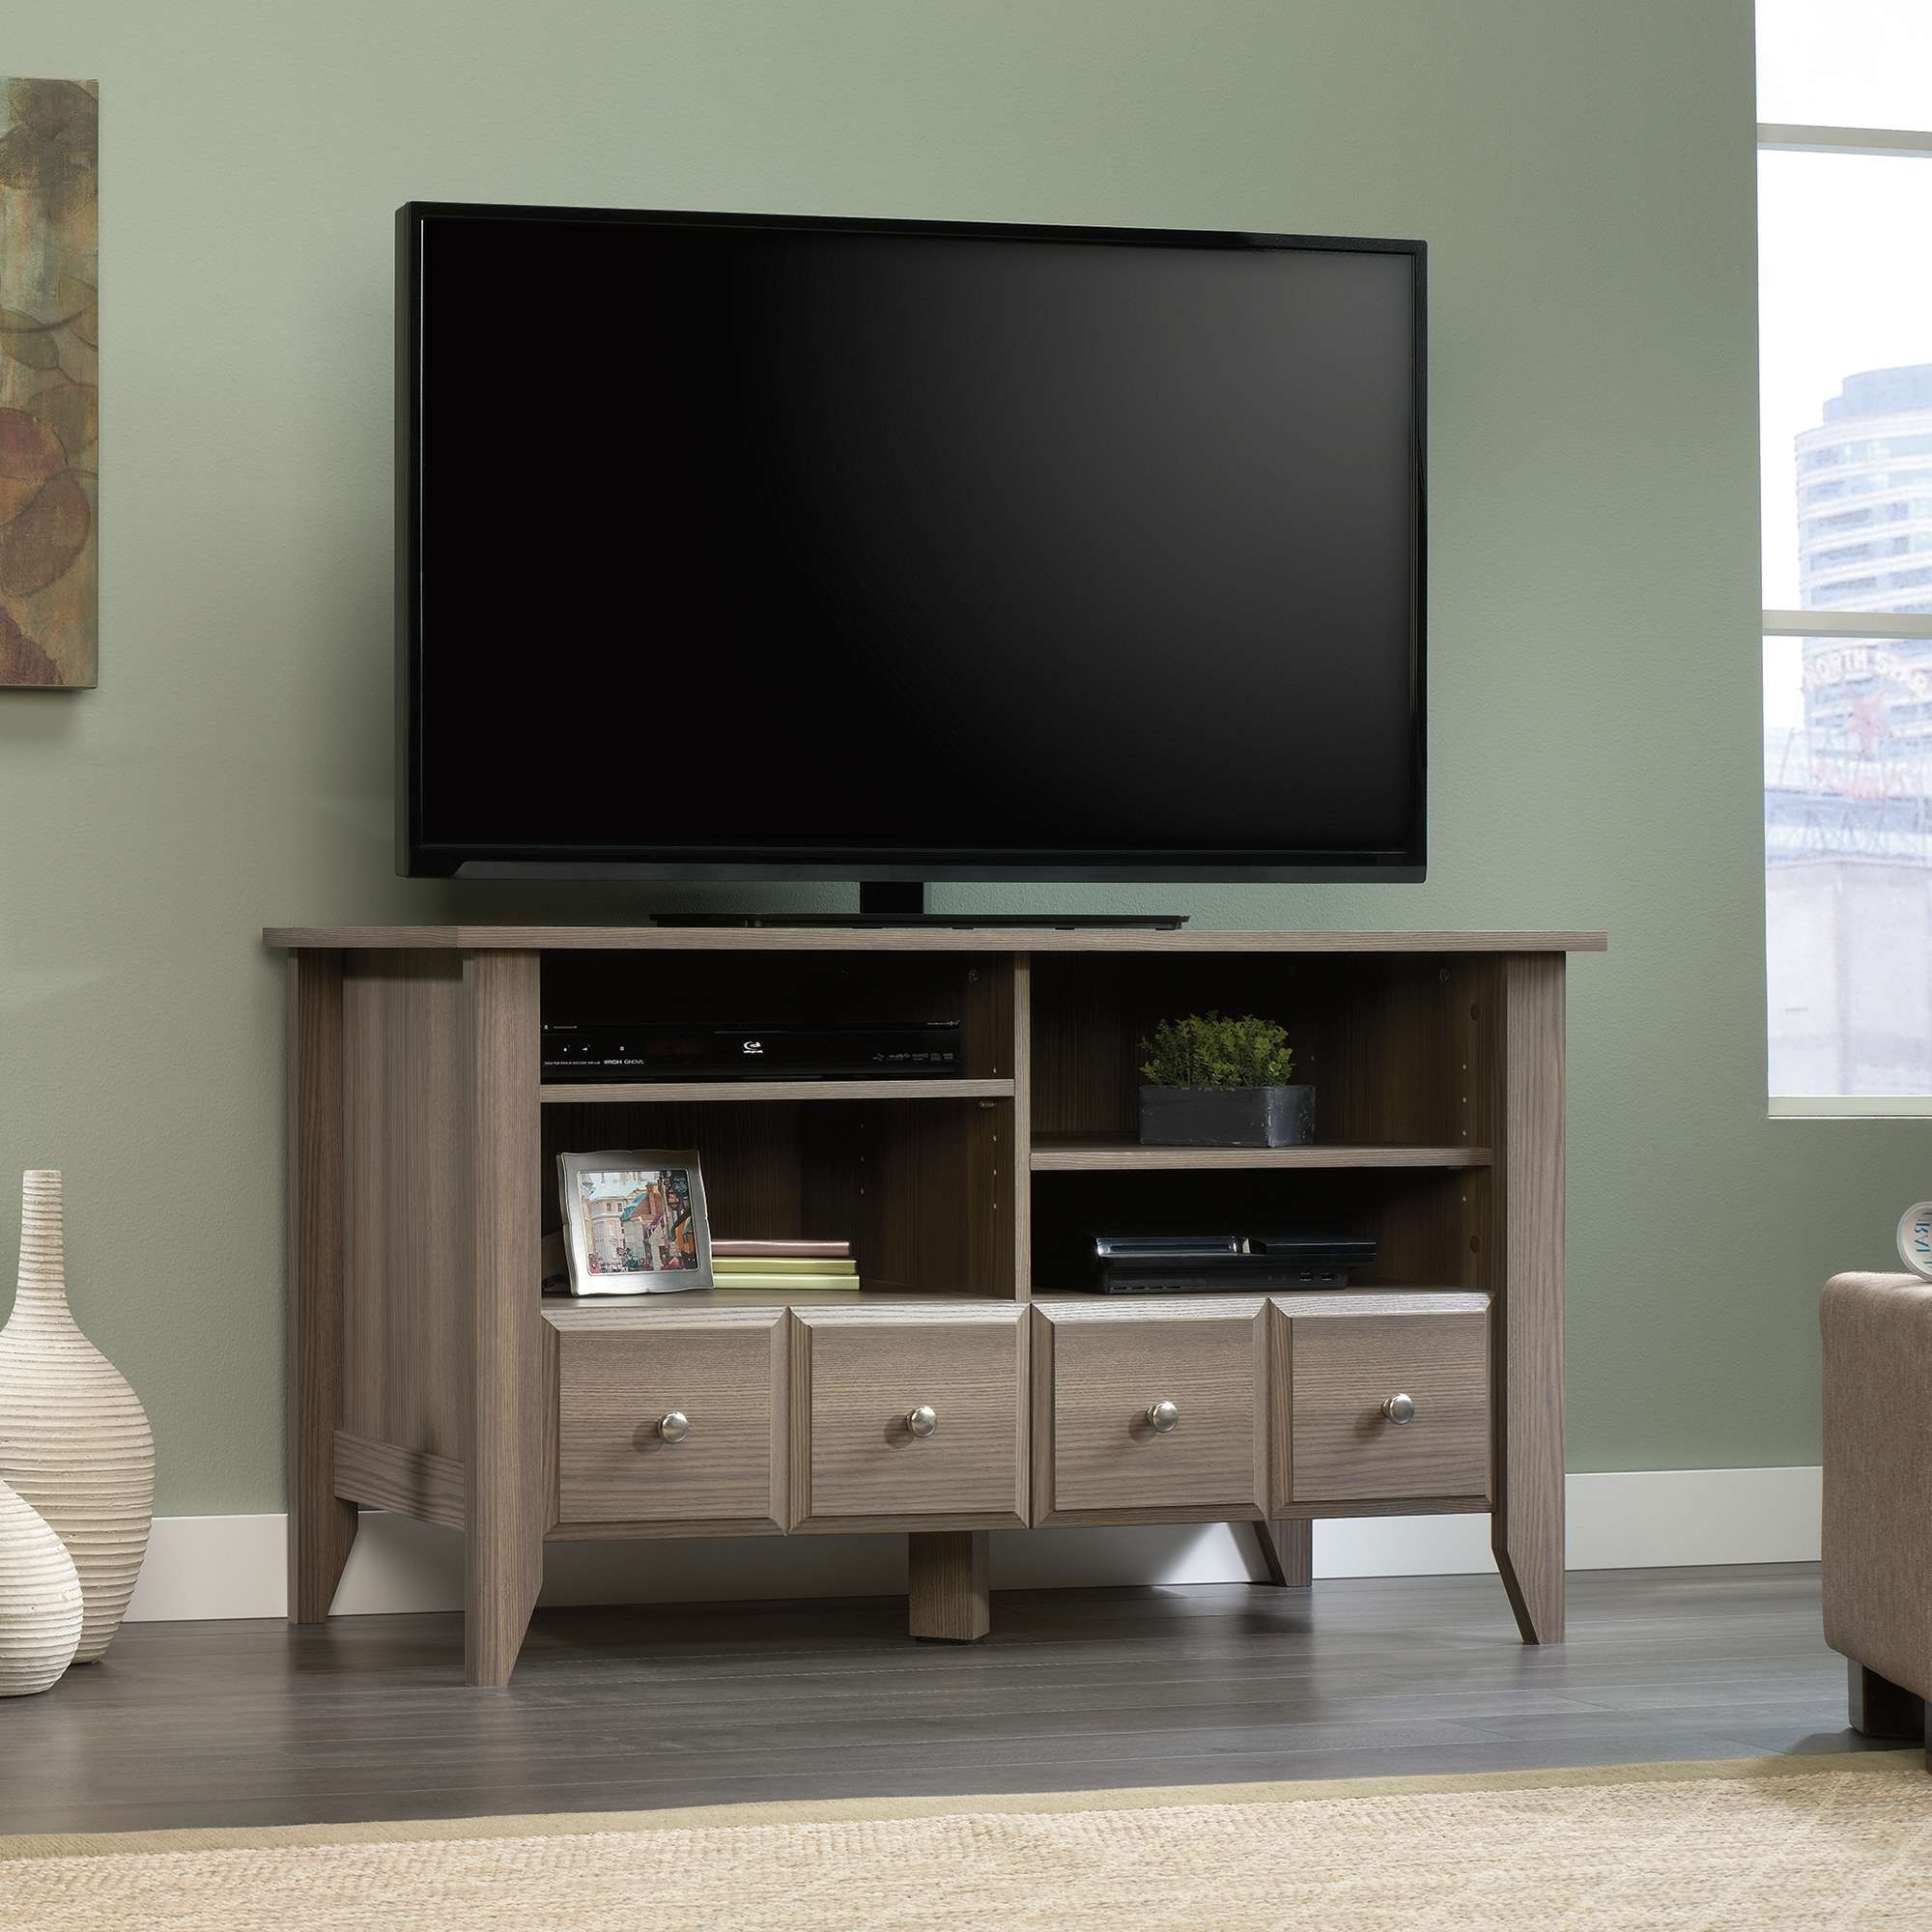 Shoal Creek | Tv Stand | 418655 | Sauder Intended For Birch Tv Stands (View 14 of 15)